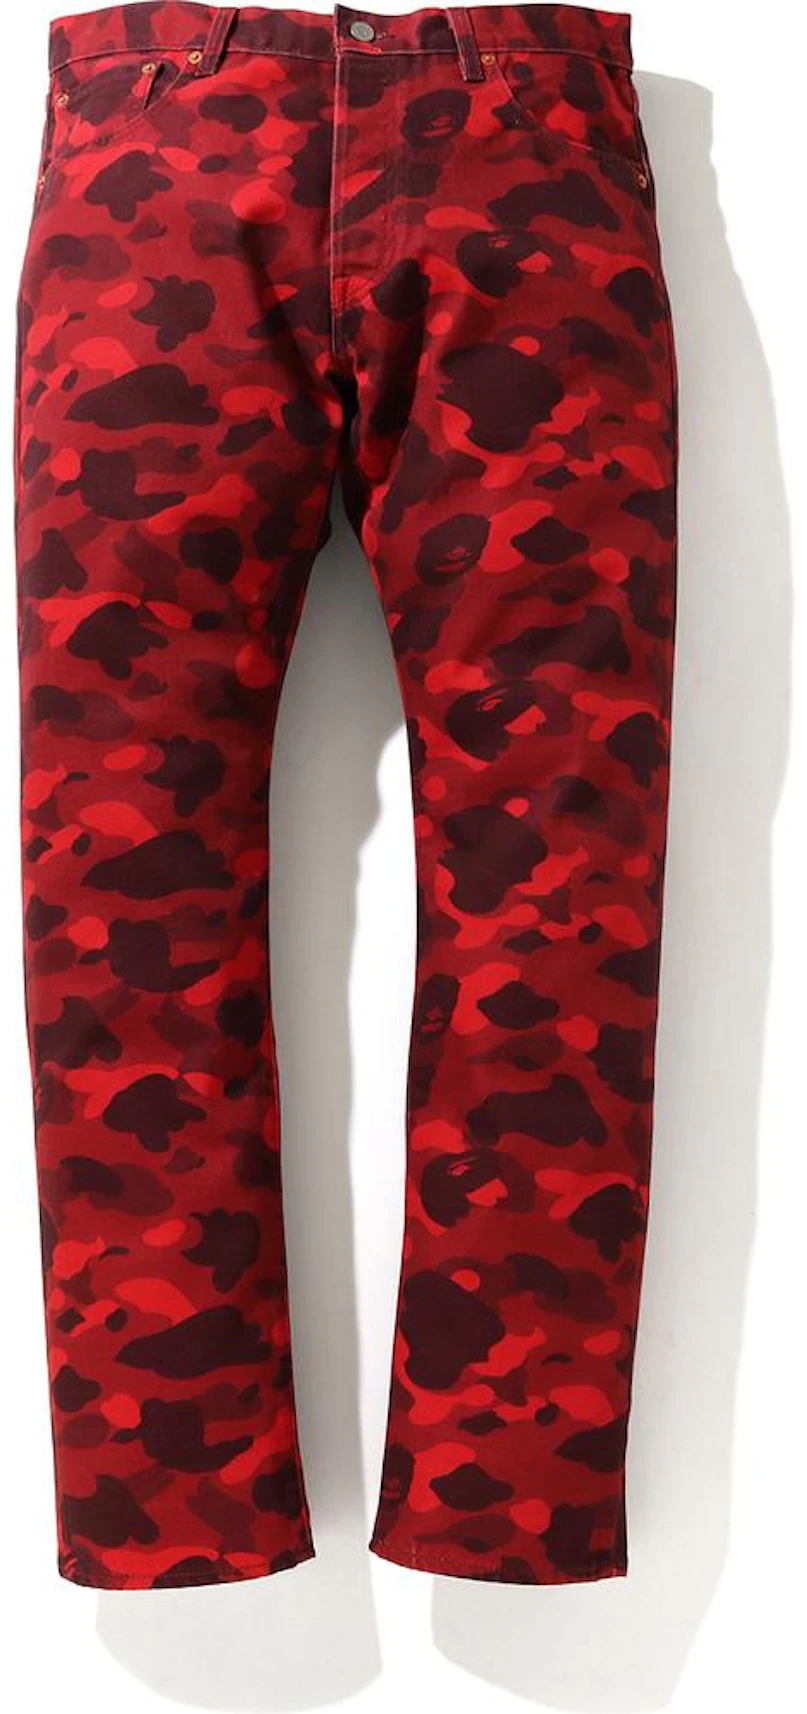 BAPE x Levi's Color Camo 501 93 Model (Europe Exclusive) Red - SS21 - US